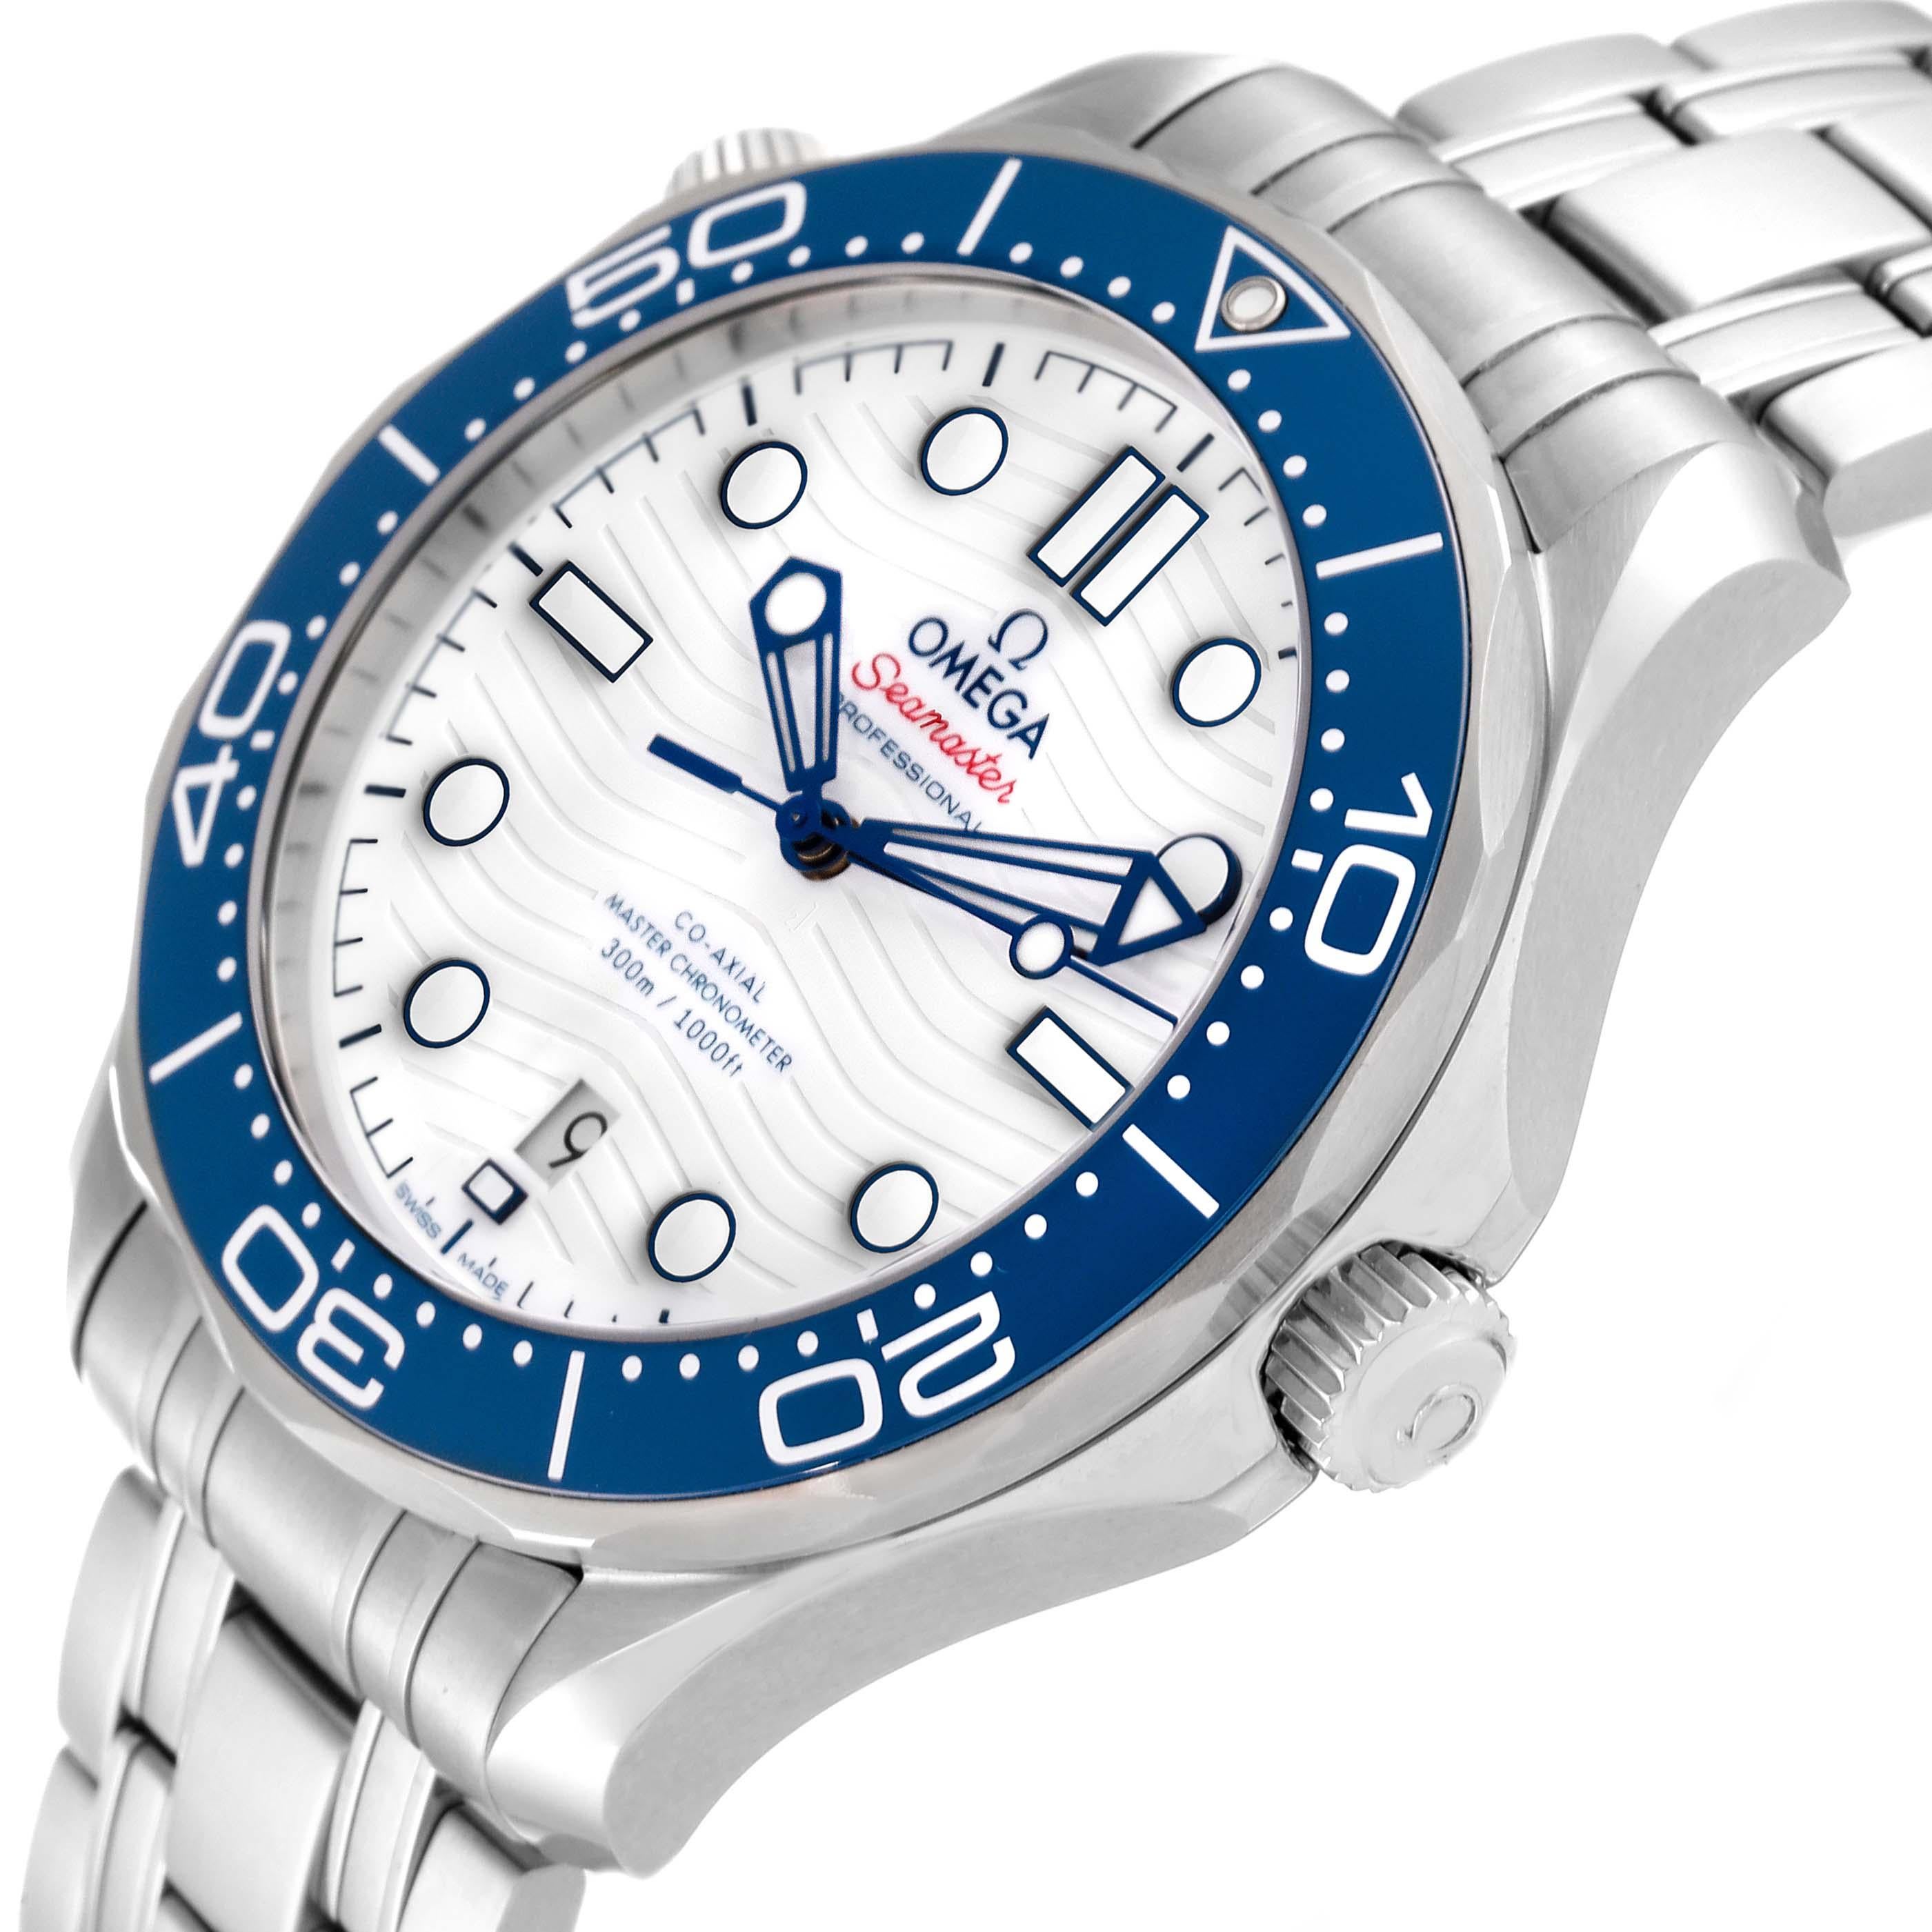 Omega Seamaster Tokyo 2020 Limited Edition Steel Mens Watch 522.30.42.20.04.001 Unworn. Automatic self-winding chronometer, Co-Axial Escapement movement with rhodium-plated finish. Stainless steel case 42.0 mm in diameter. Omega logo on crown.